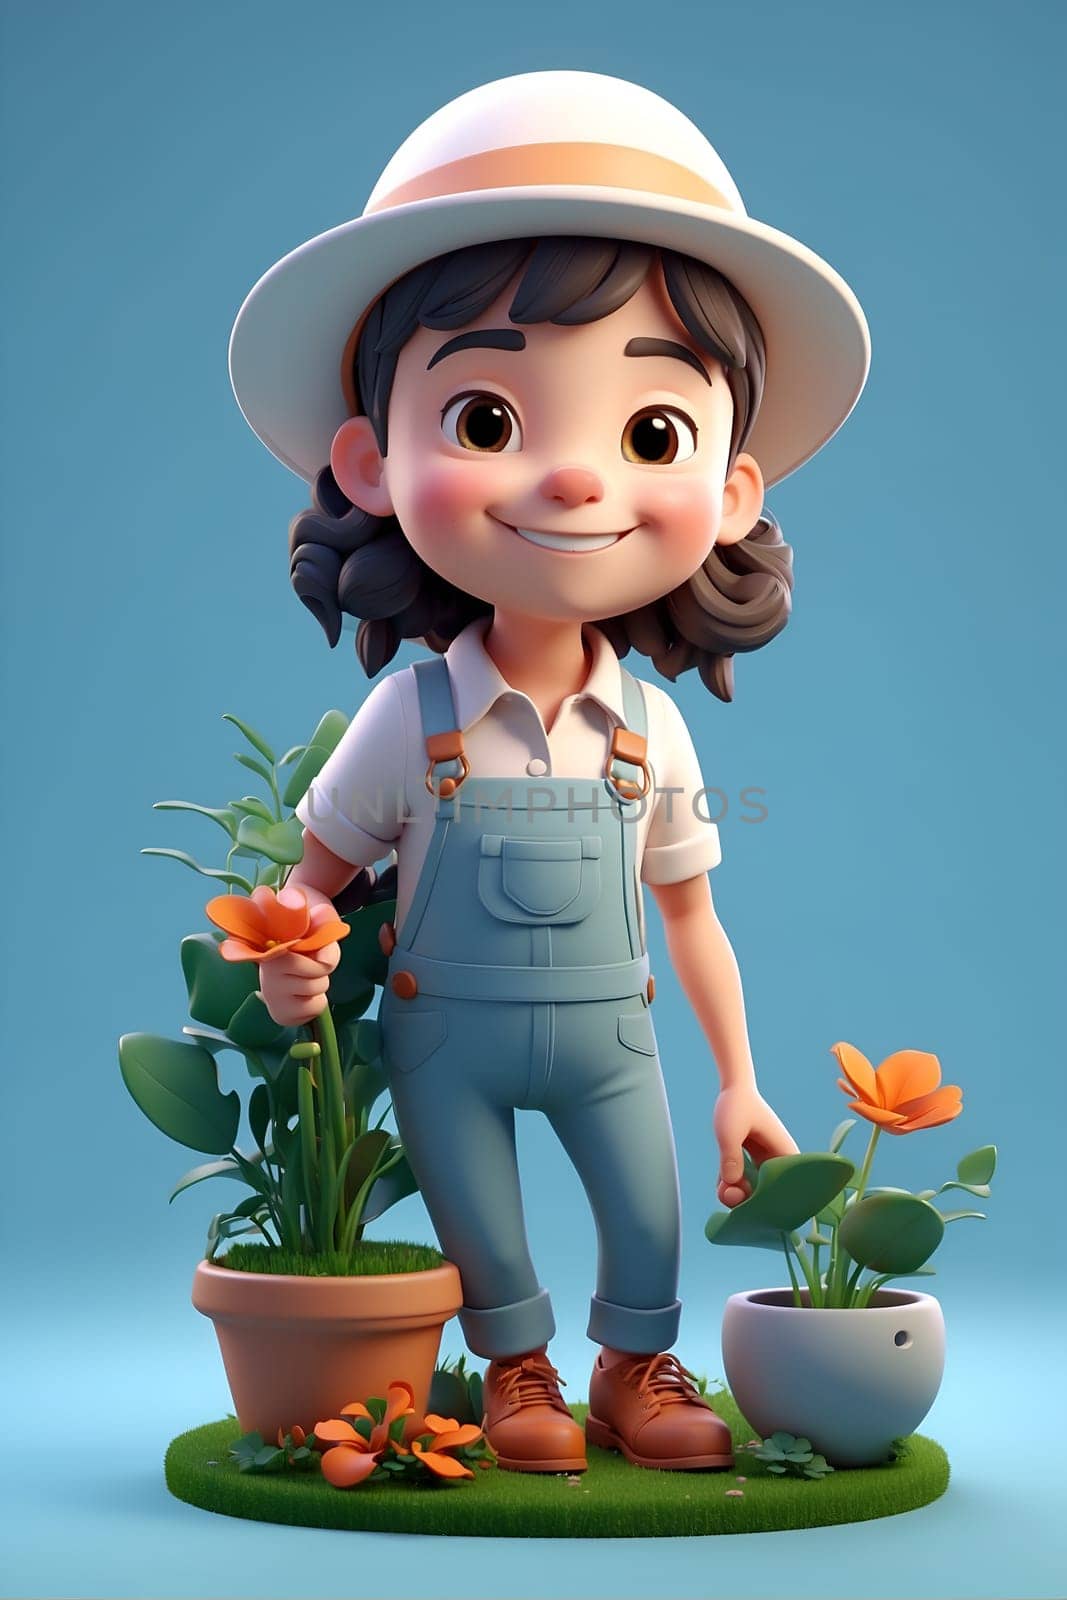 A sweet little girl stands beside a healthy potted plant, filling the air with innocence and natural beauty.